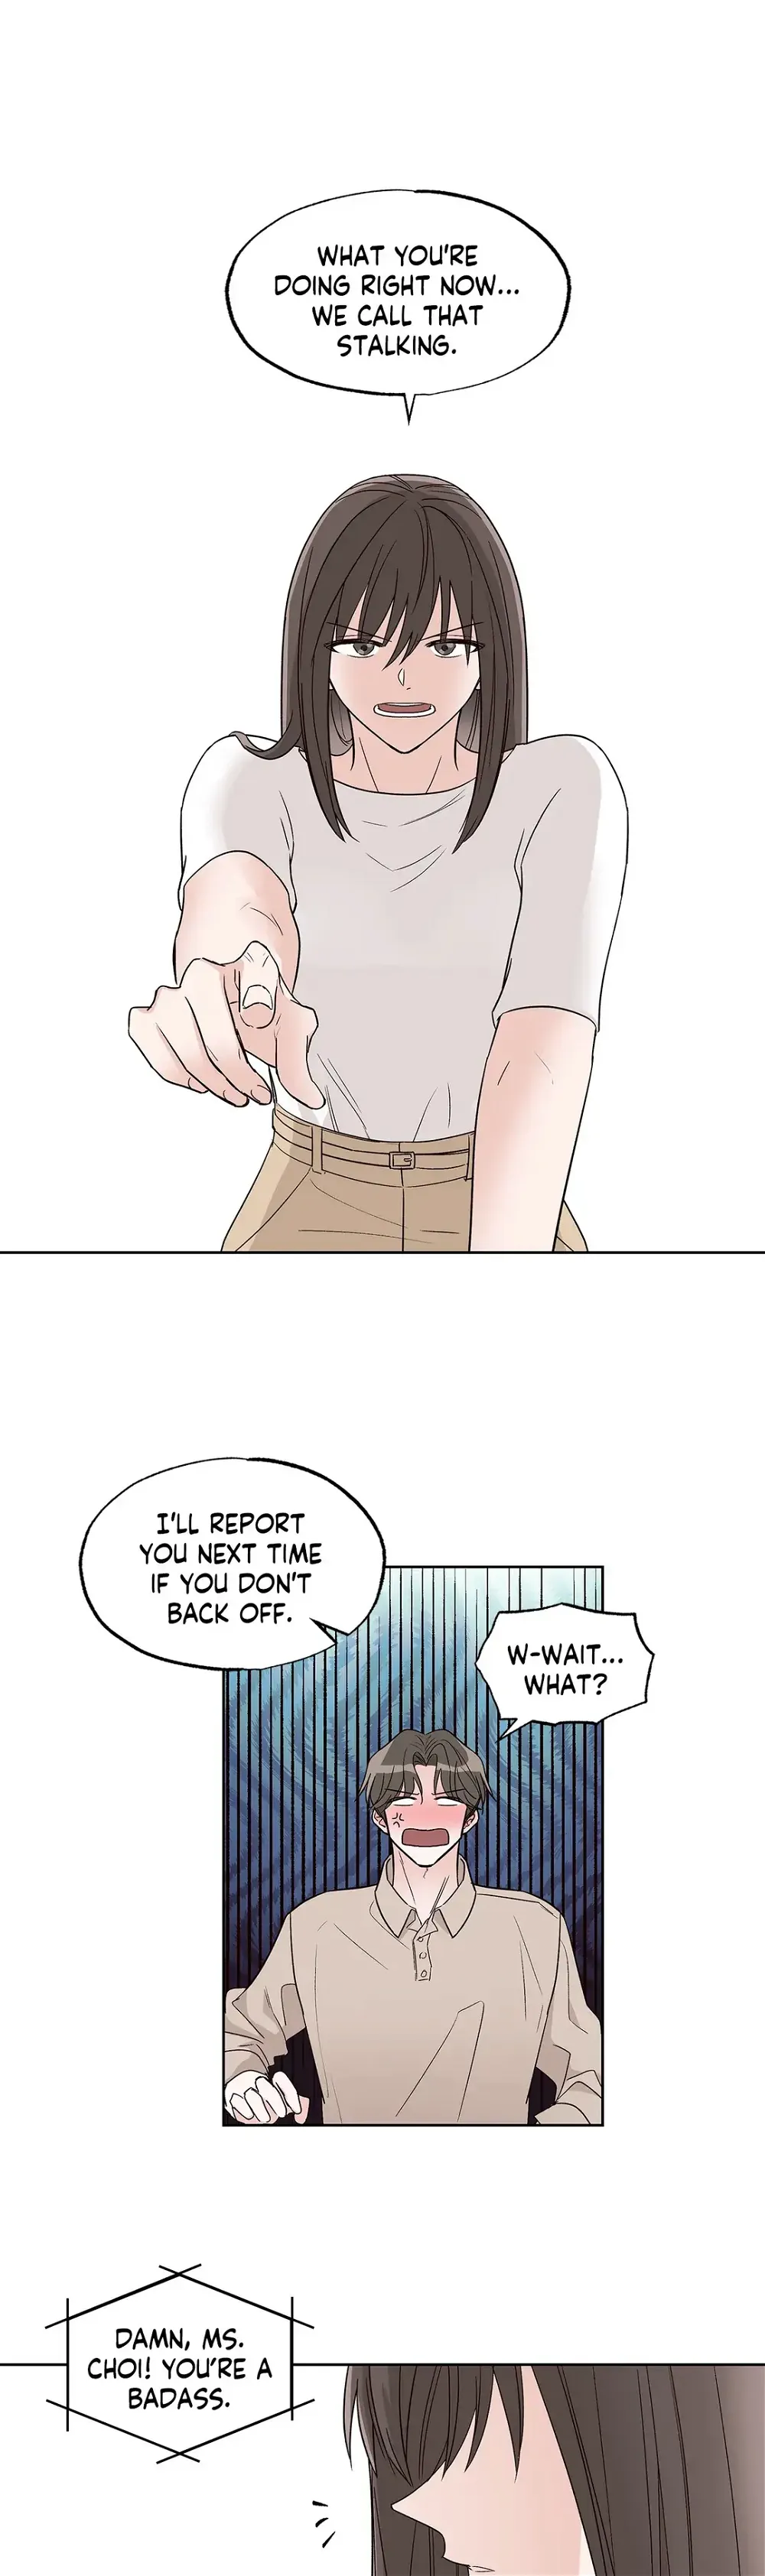 Learning to Love You chapter 12 - Page 7